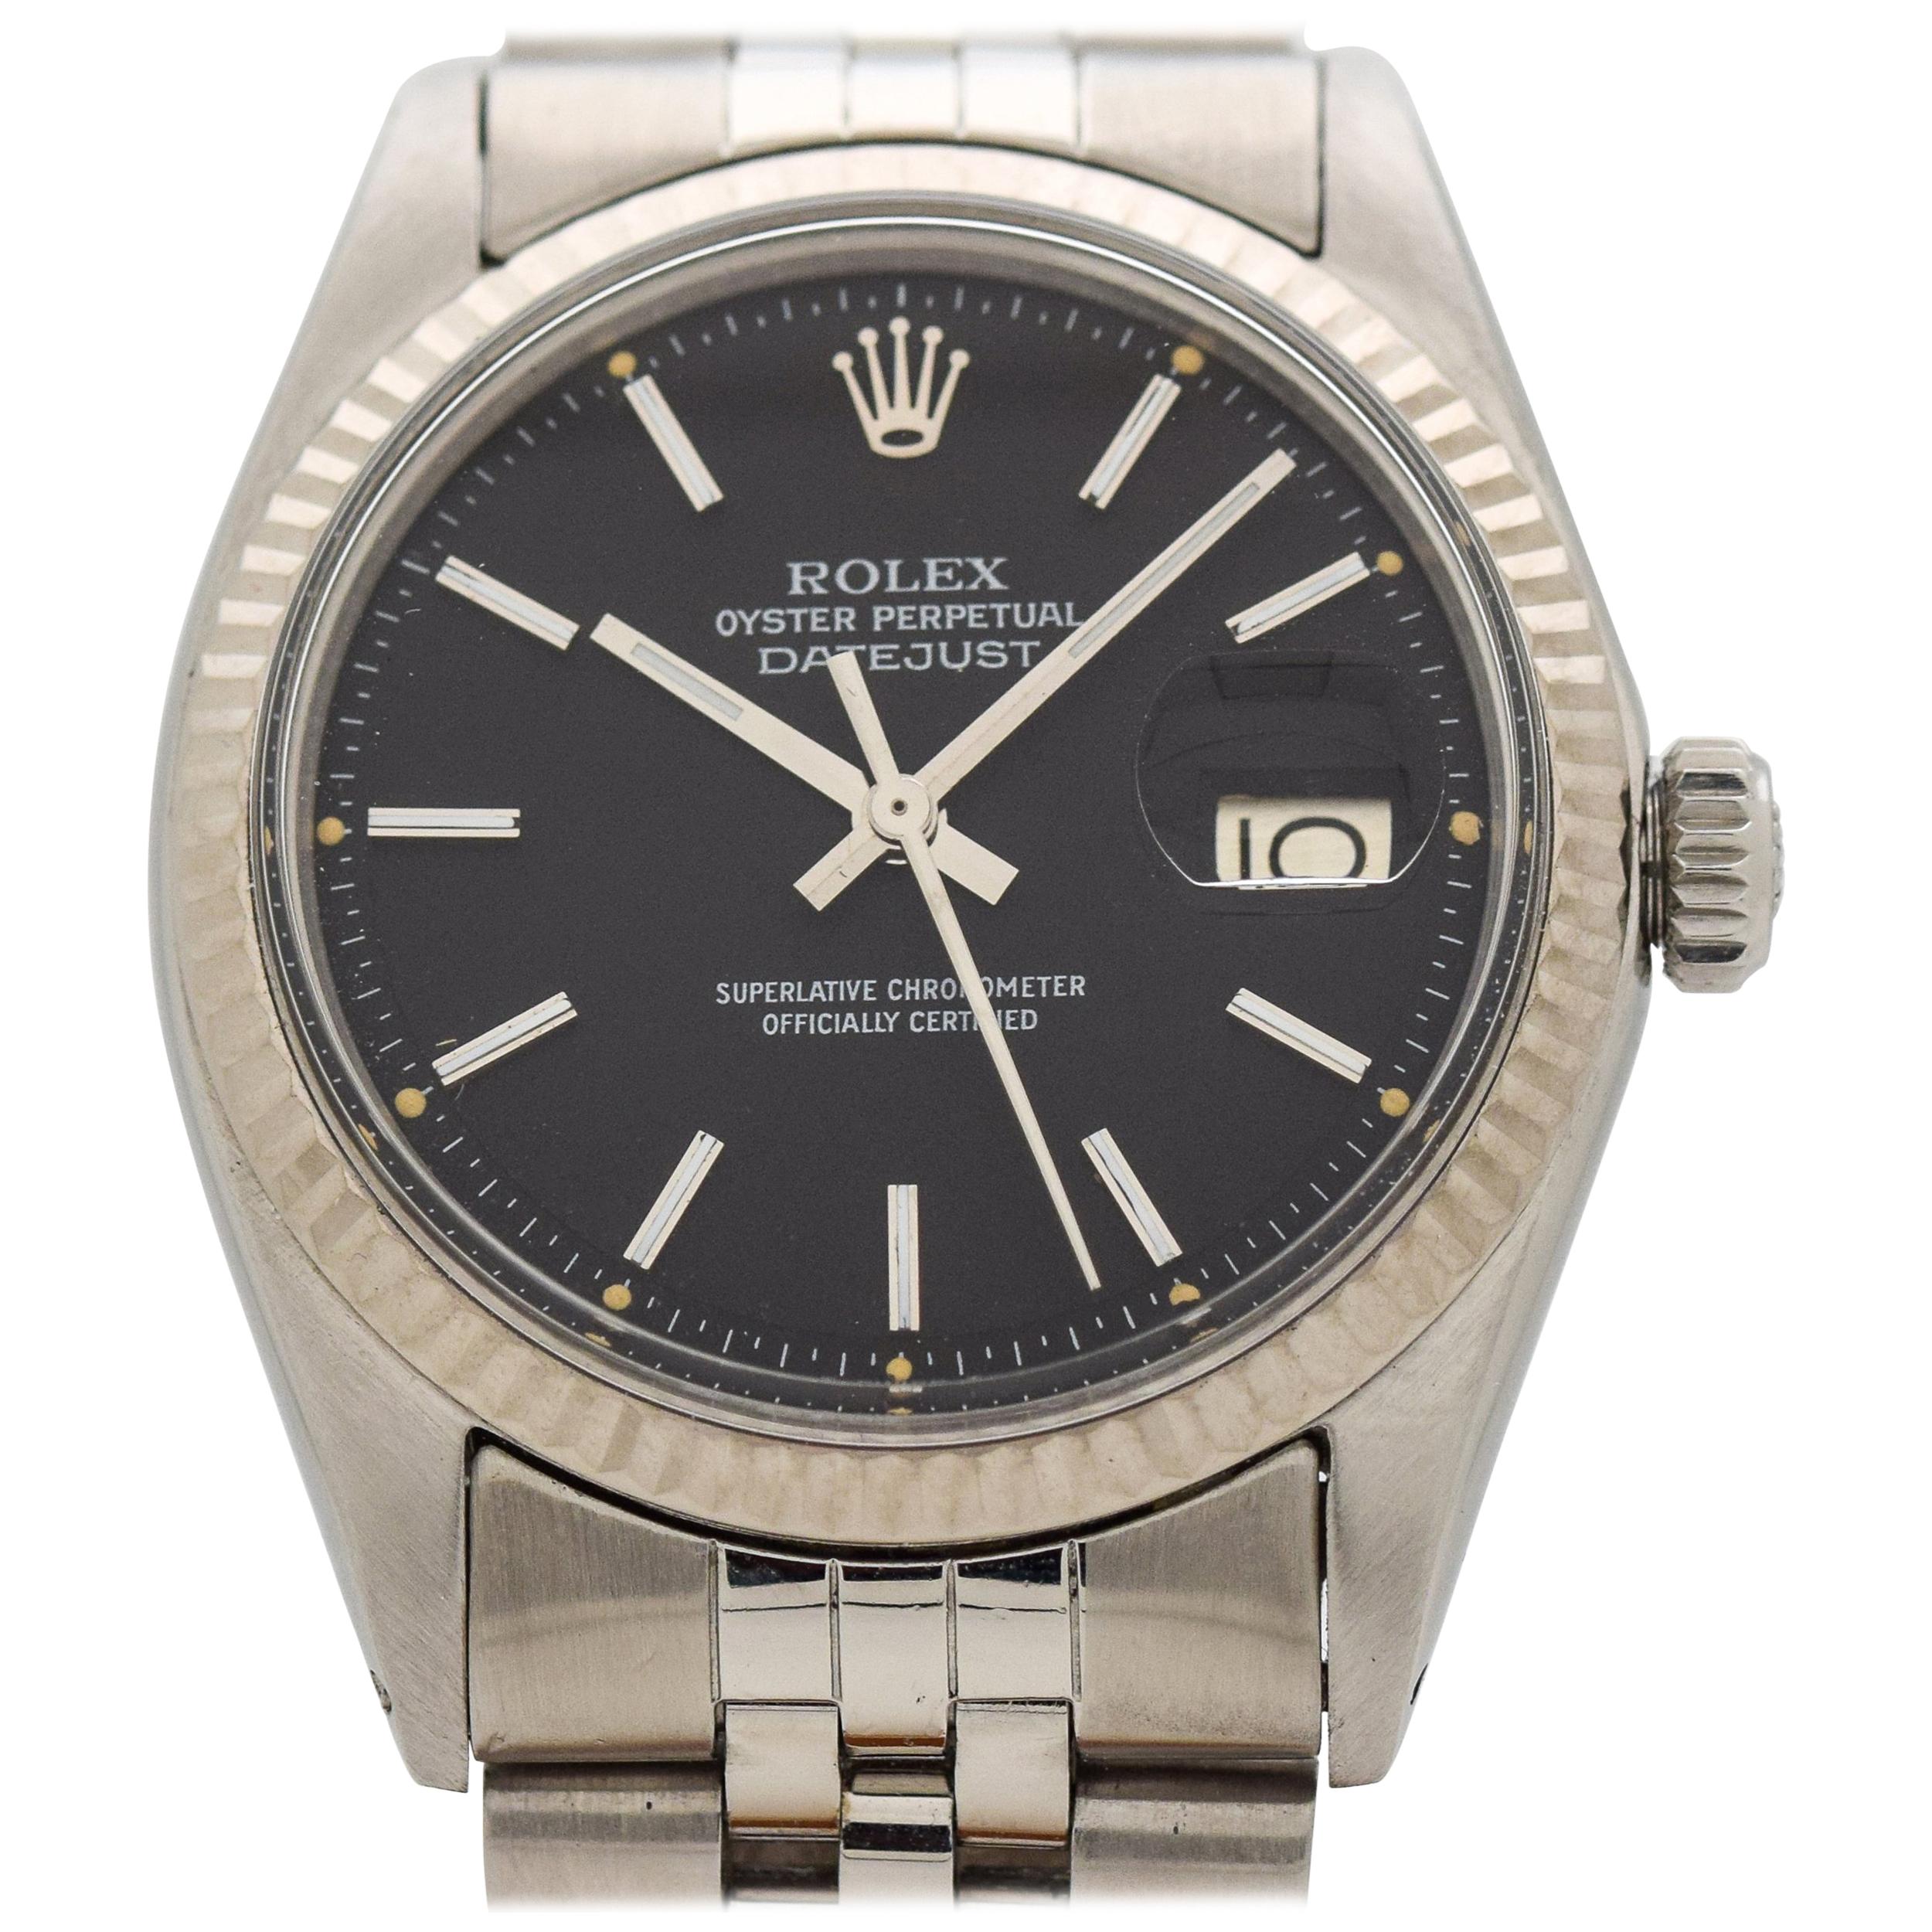 Vintage Rolex Datejust Reference 1601 with Black Dial, 1977